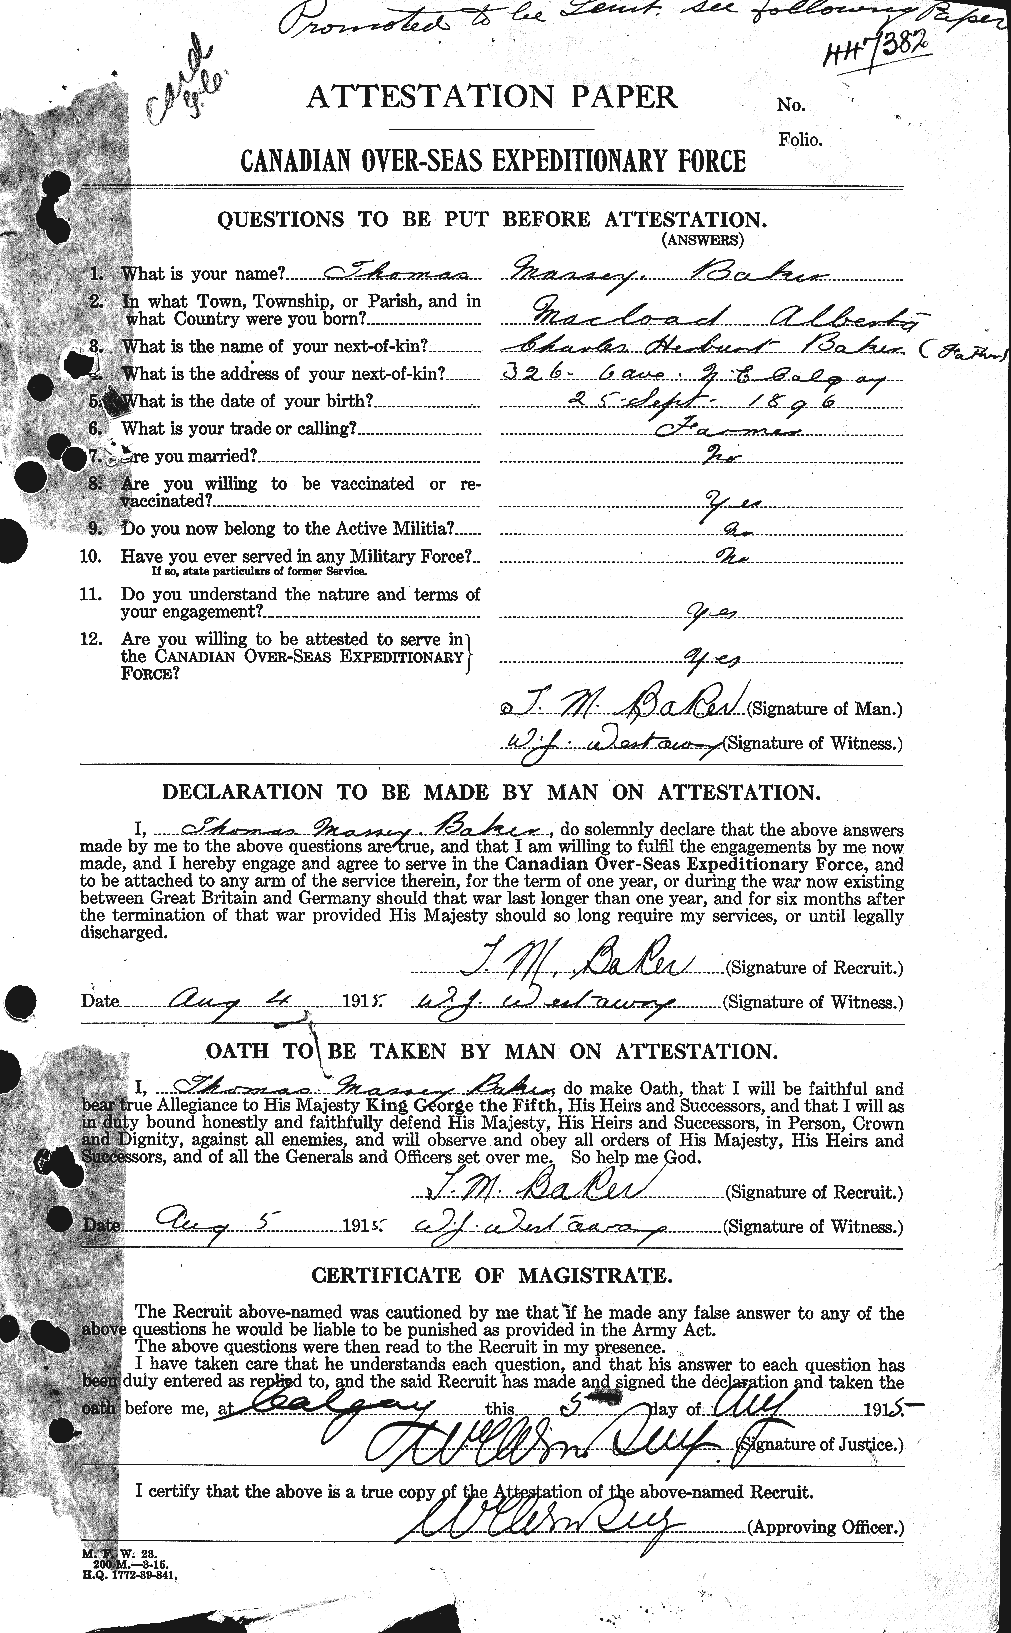 Personnel Records of the First World War - CEF 221445a